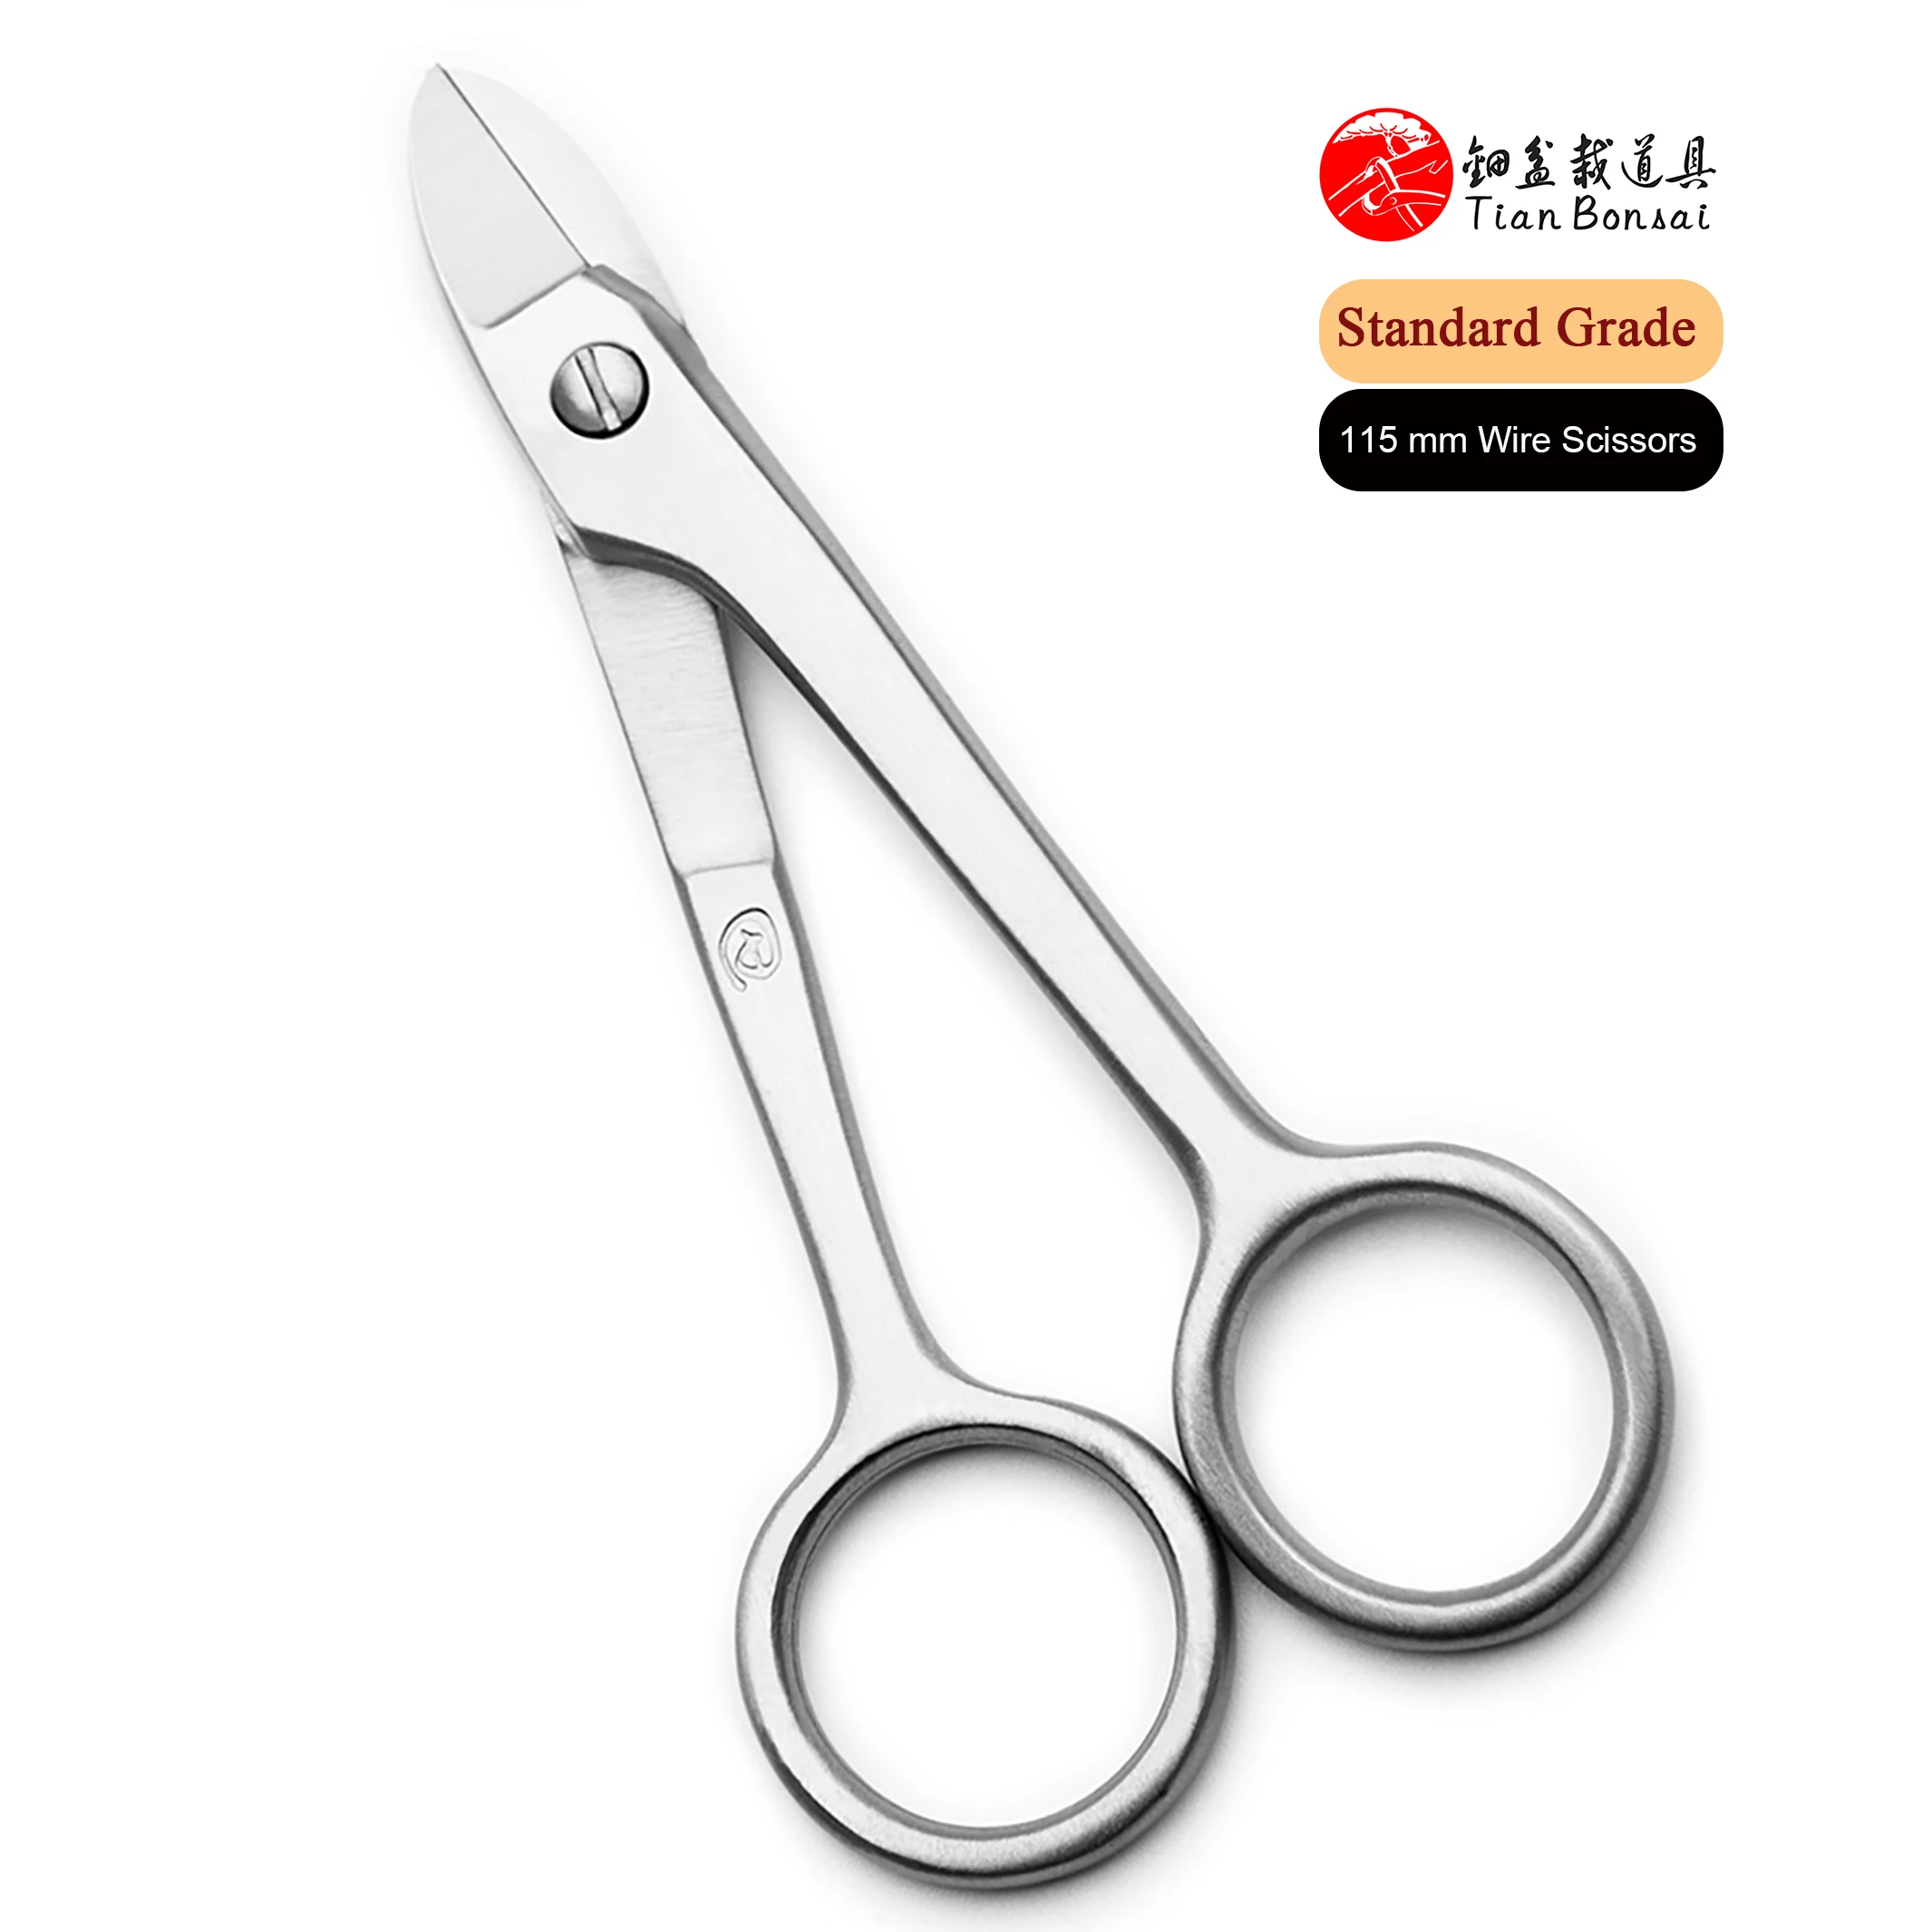 Standard bonsai tools 115 mm wire scissors integrally forged with 3Cr13 alloy steel